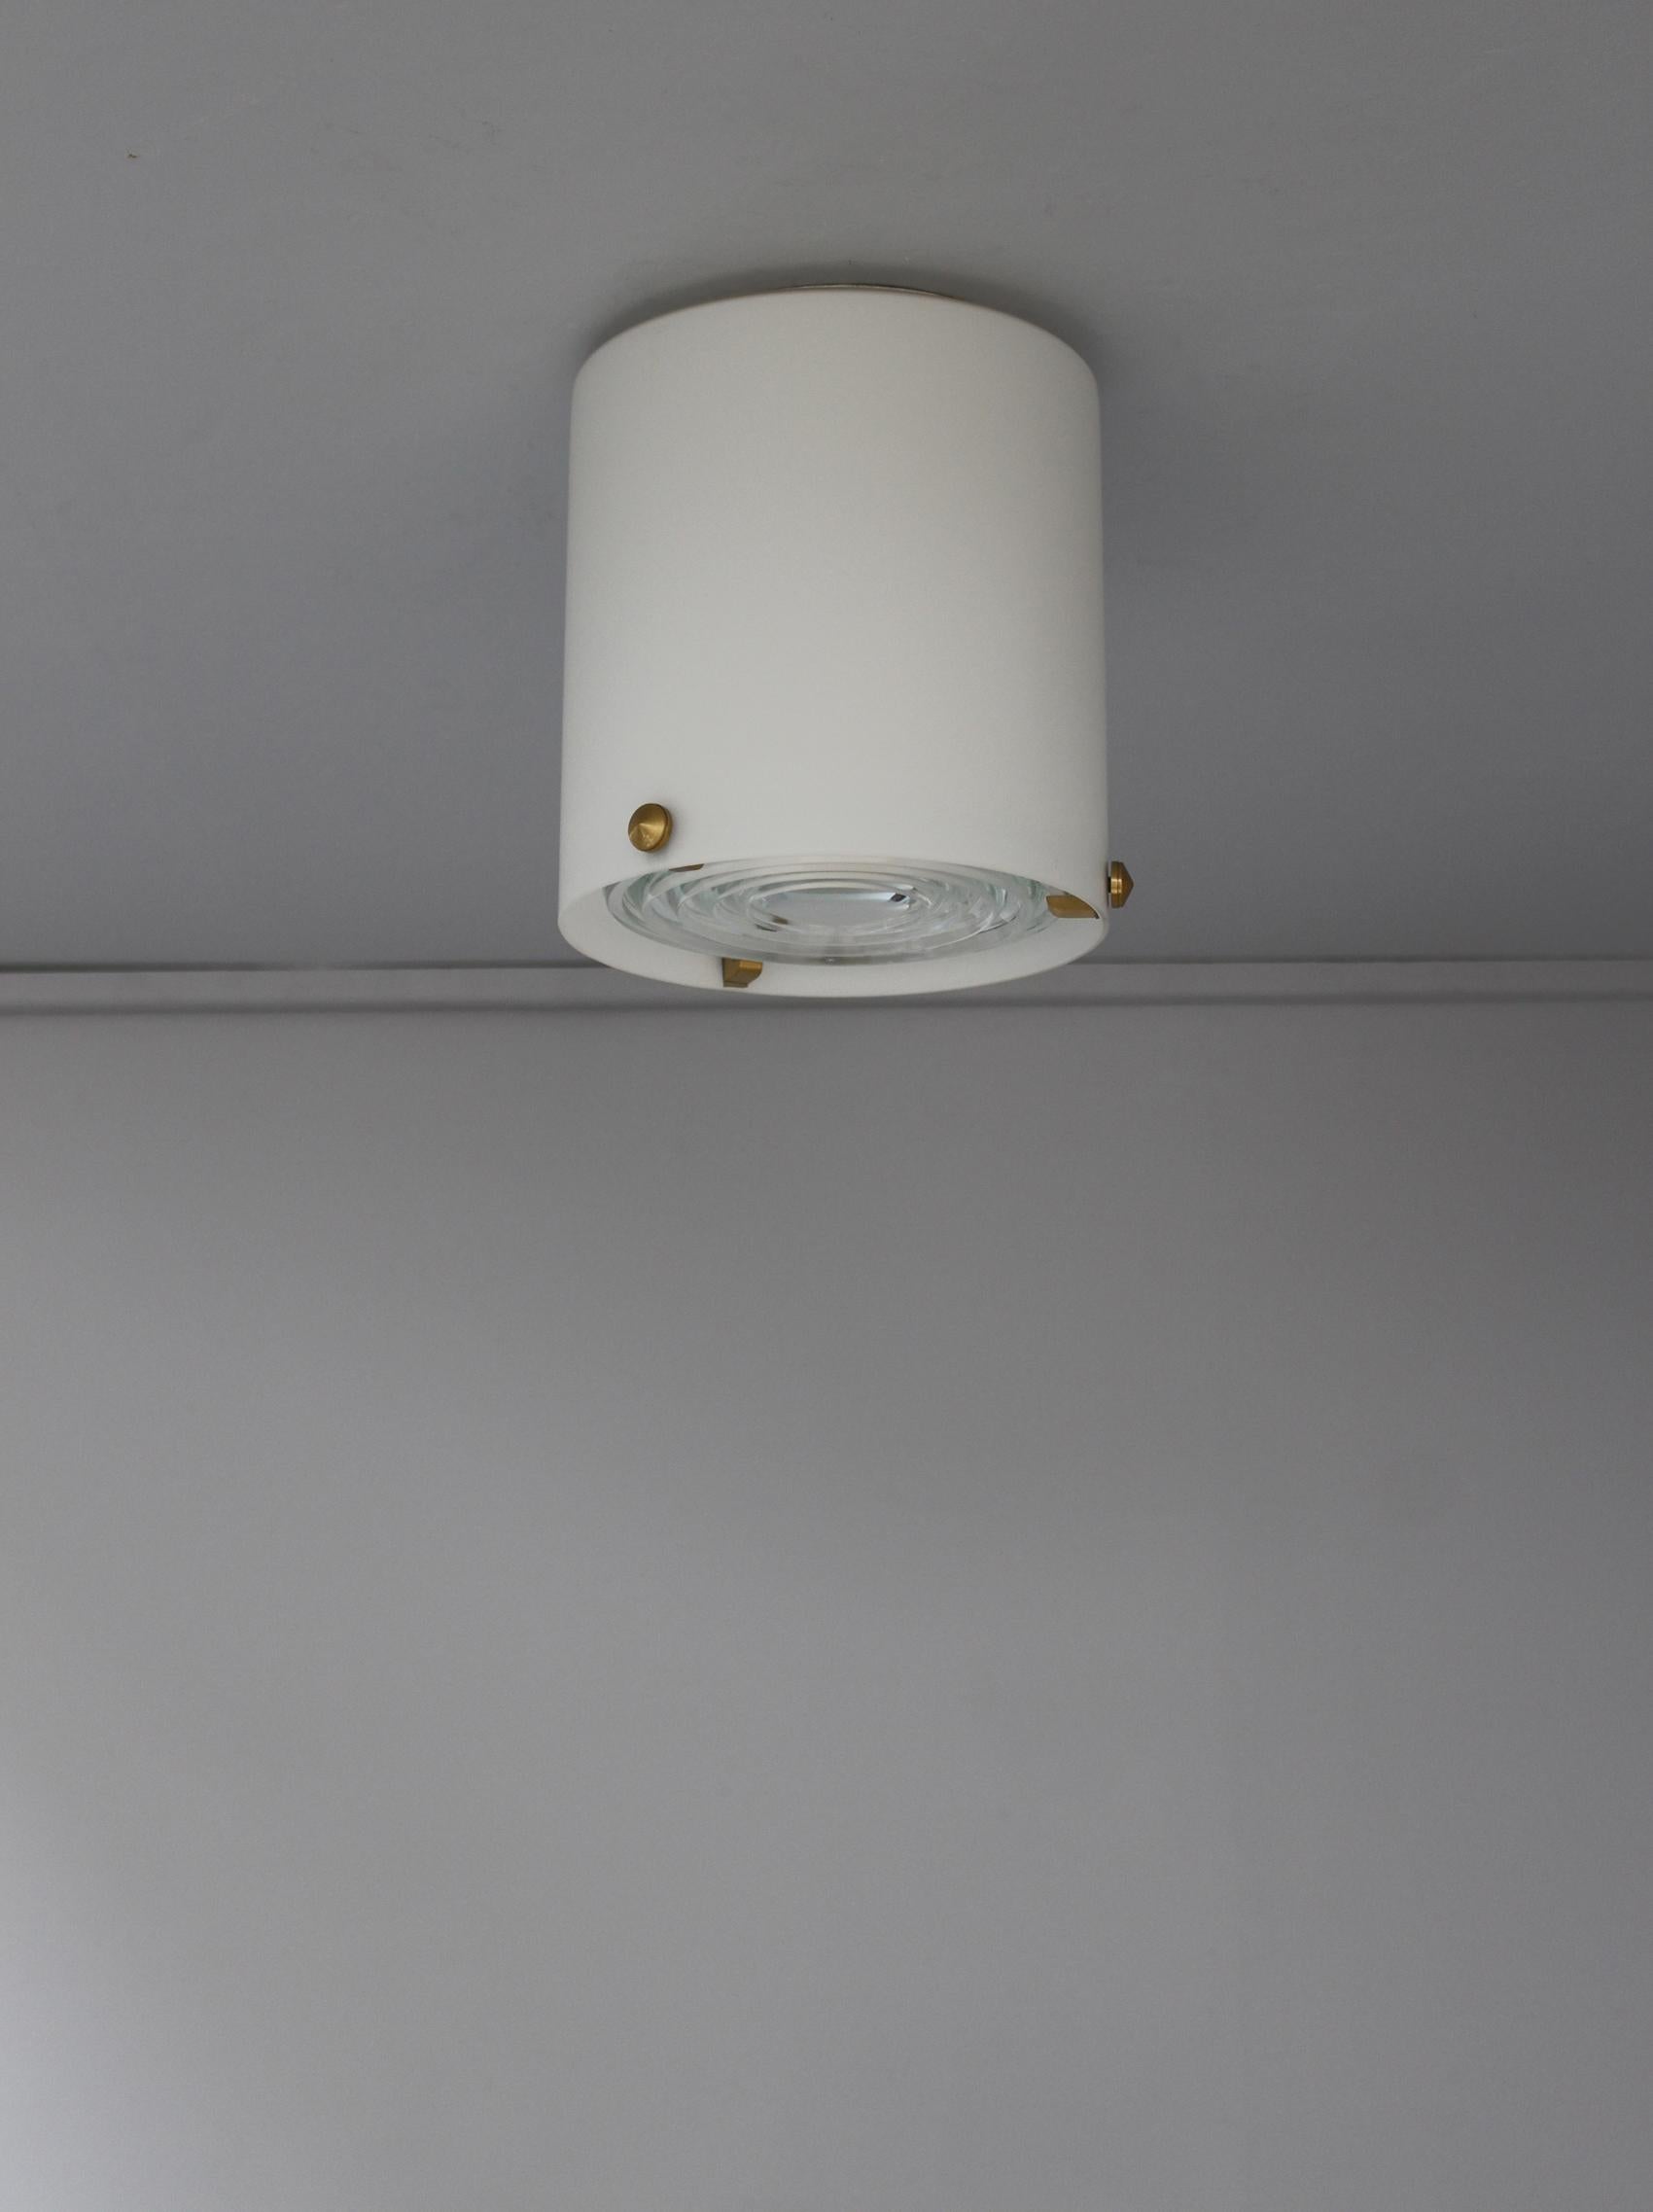 Jean Perzel - A fine French midcentury cylinder-shaped flush mounts / ceiling lights in enameled glass with three brass studs that support a prismatic glass lens.